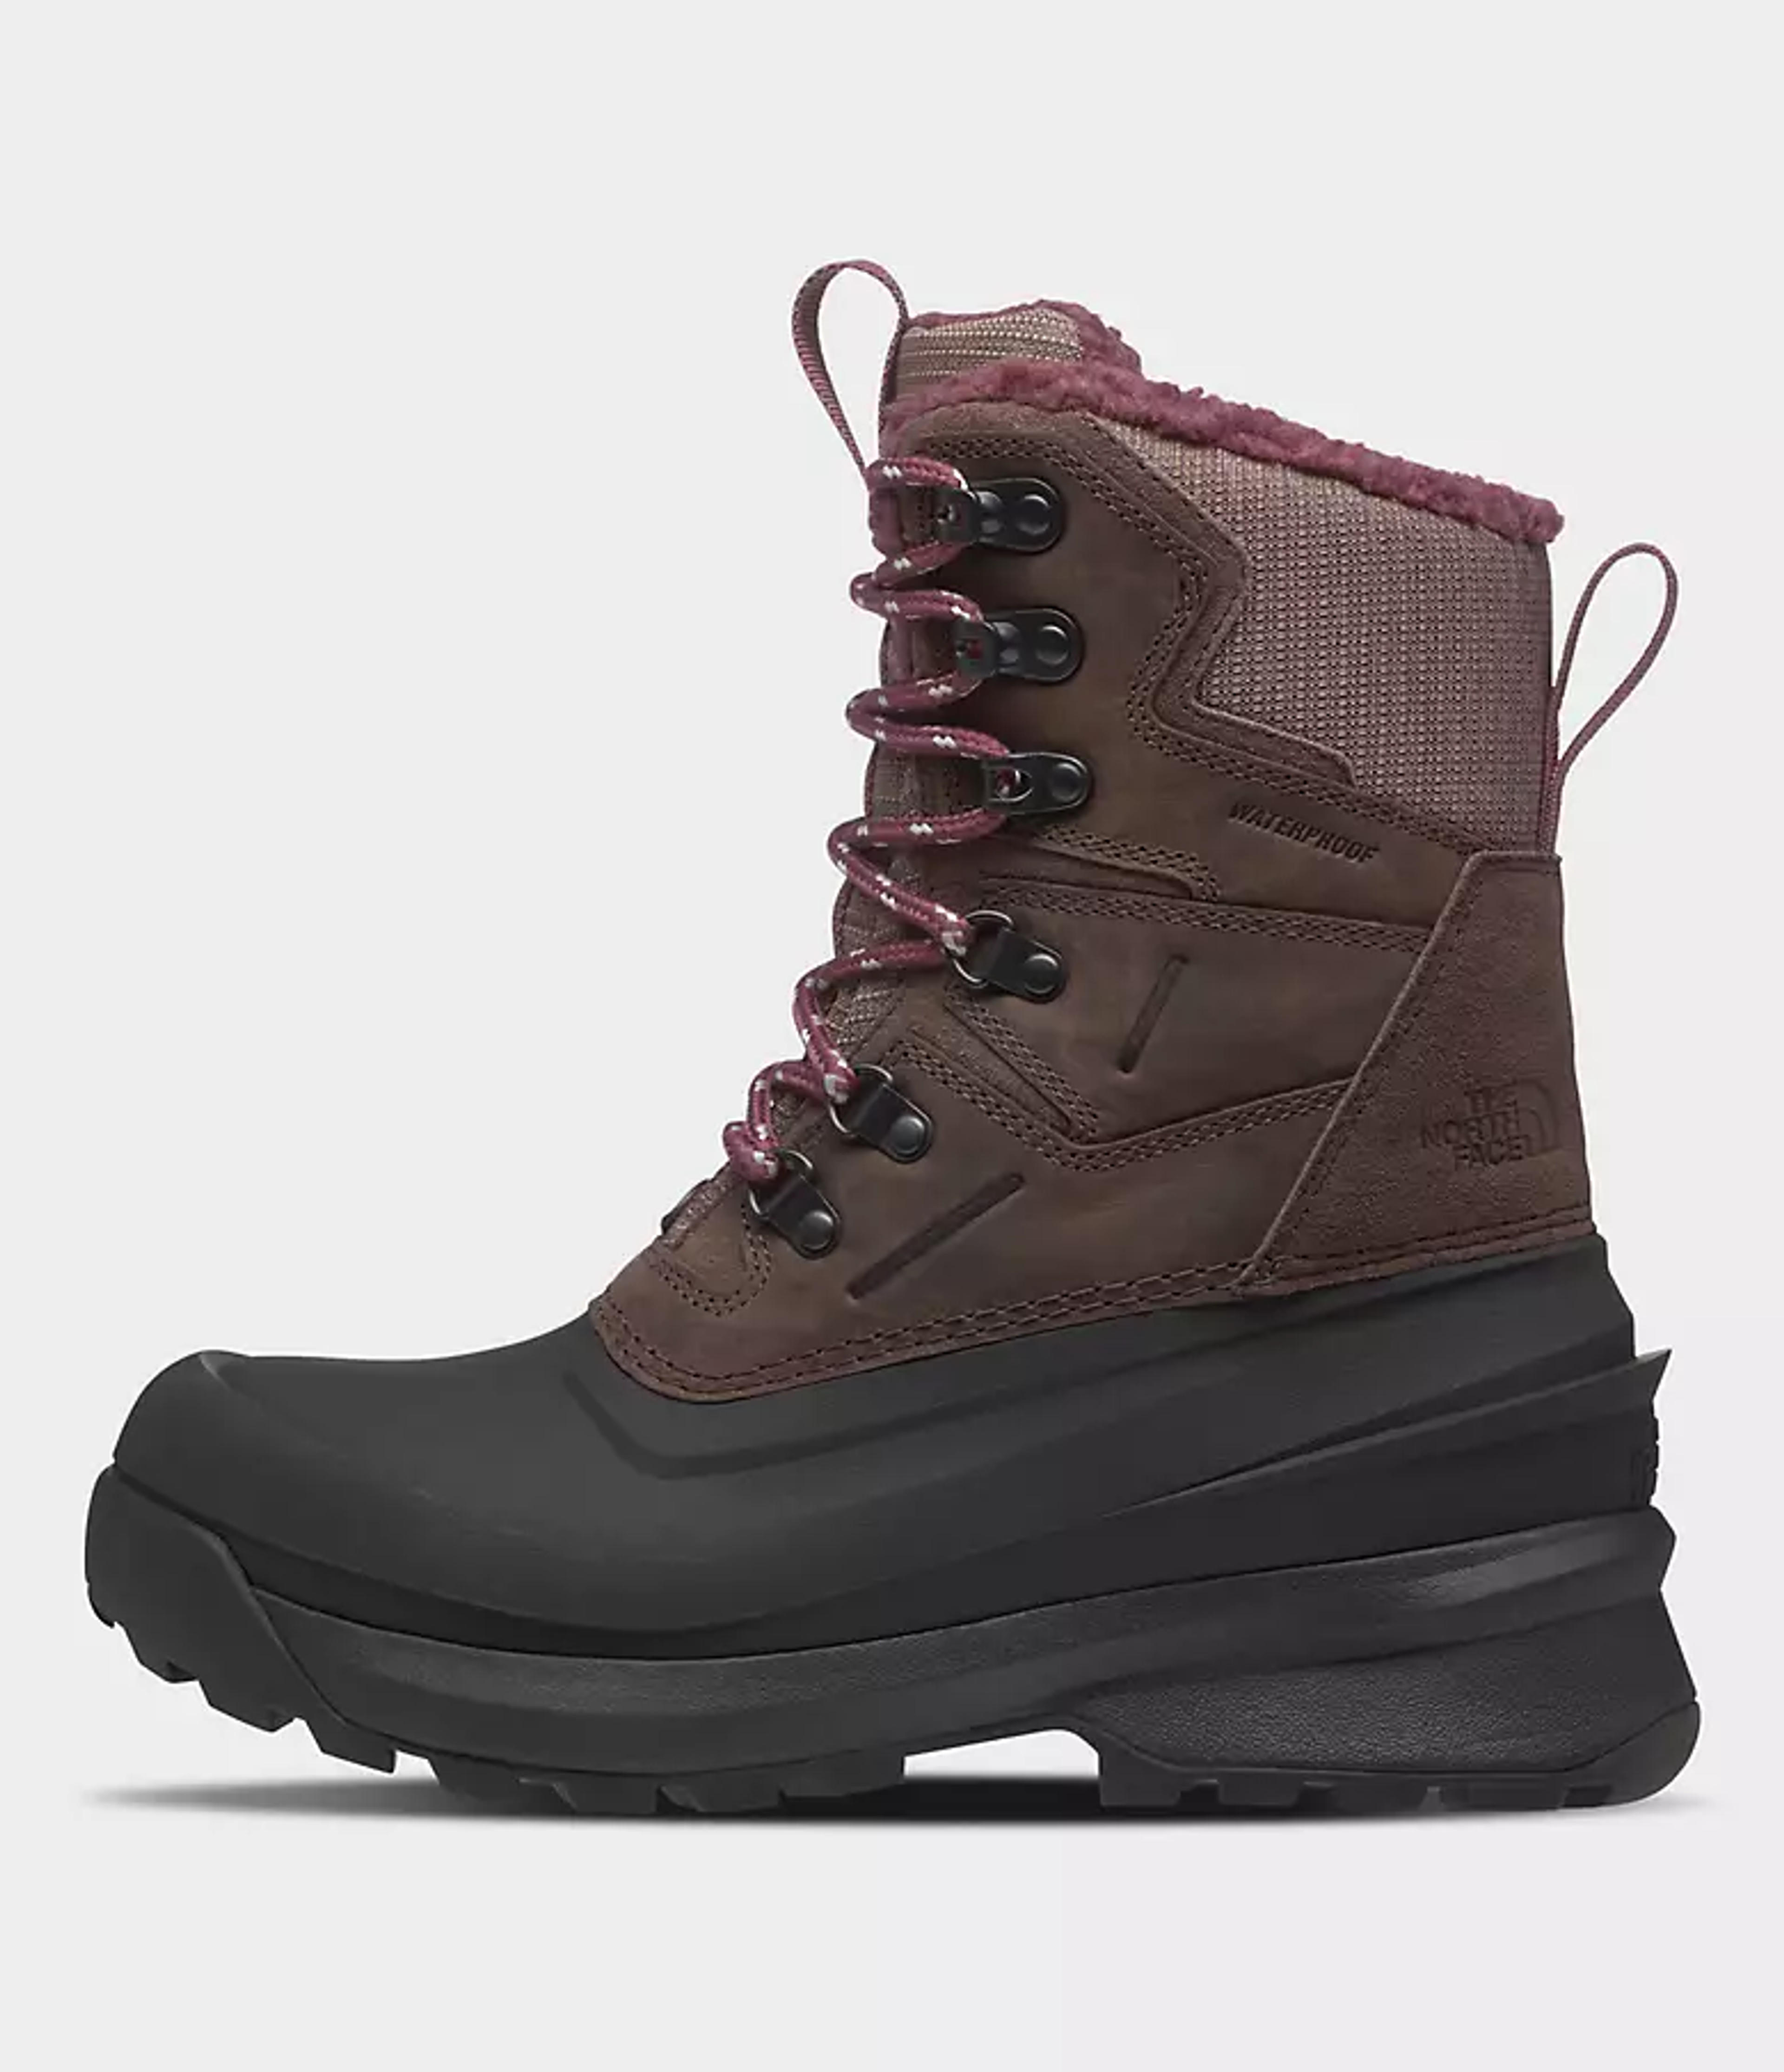 Women’s Chilkat V 400 Waterproof Boots | The North Face